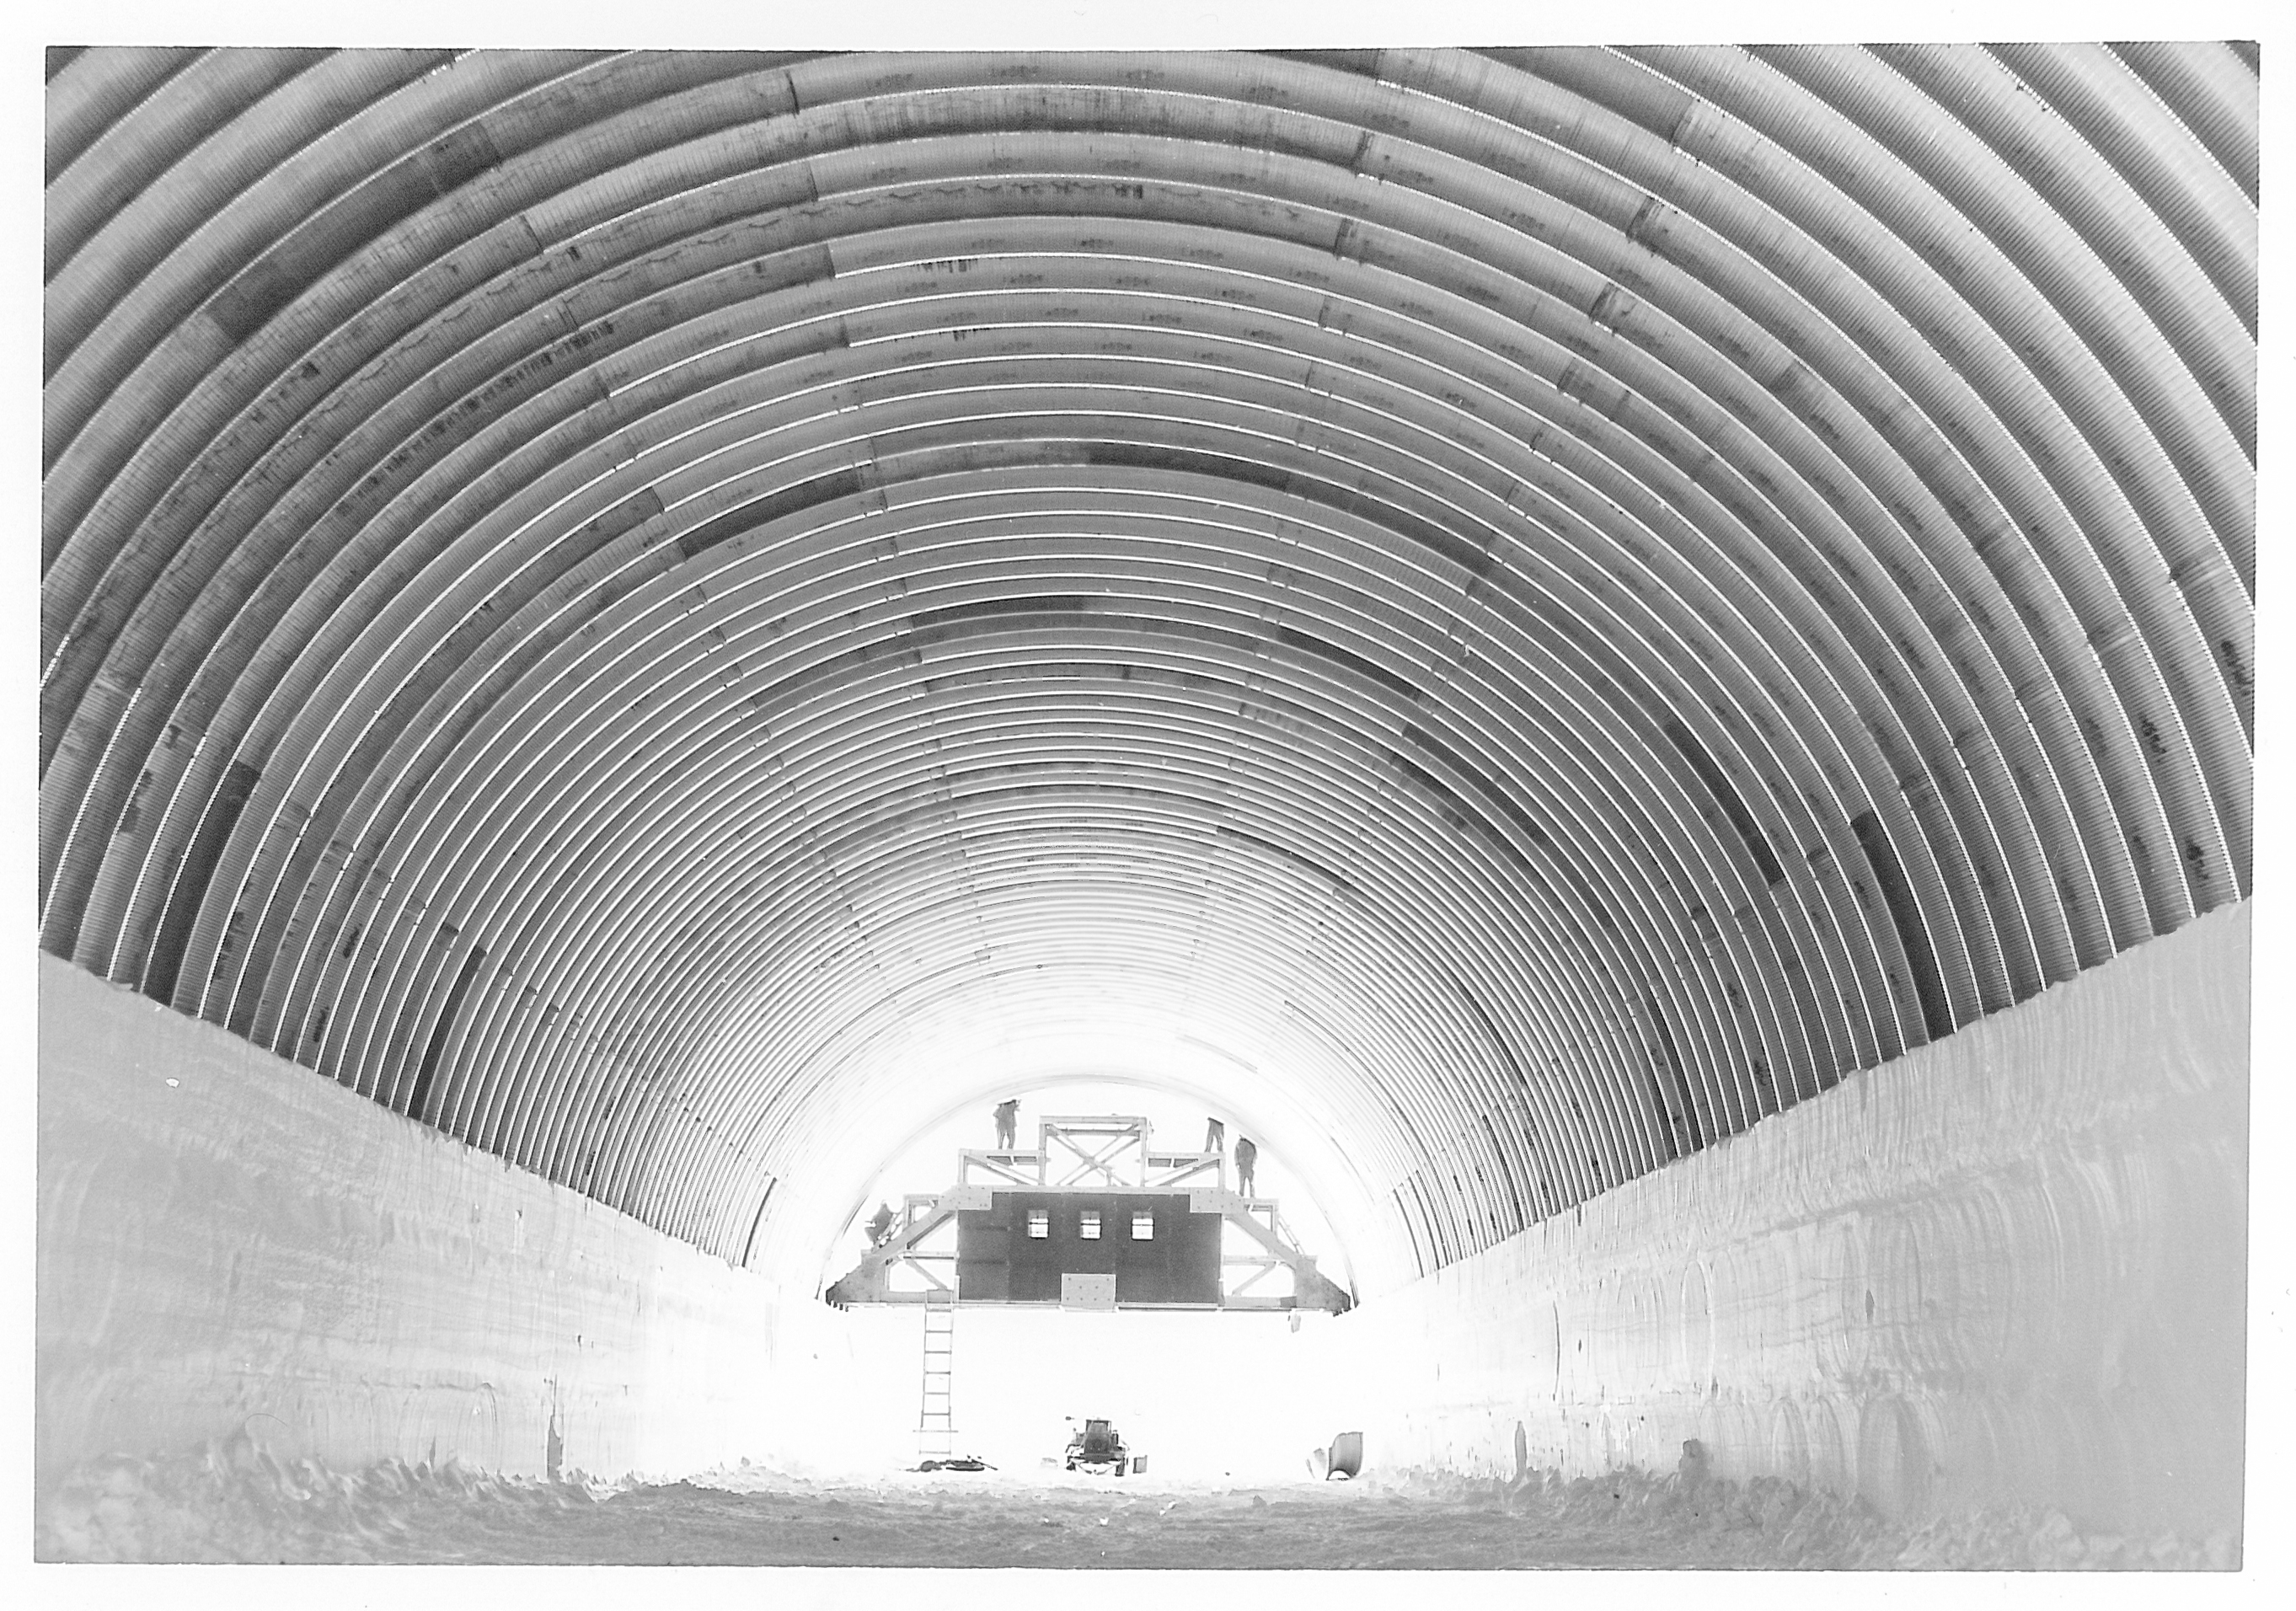 The view inside a long arched tunnel.